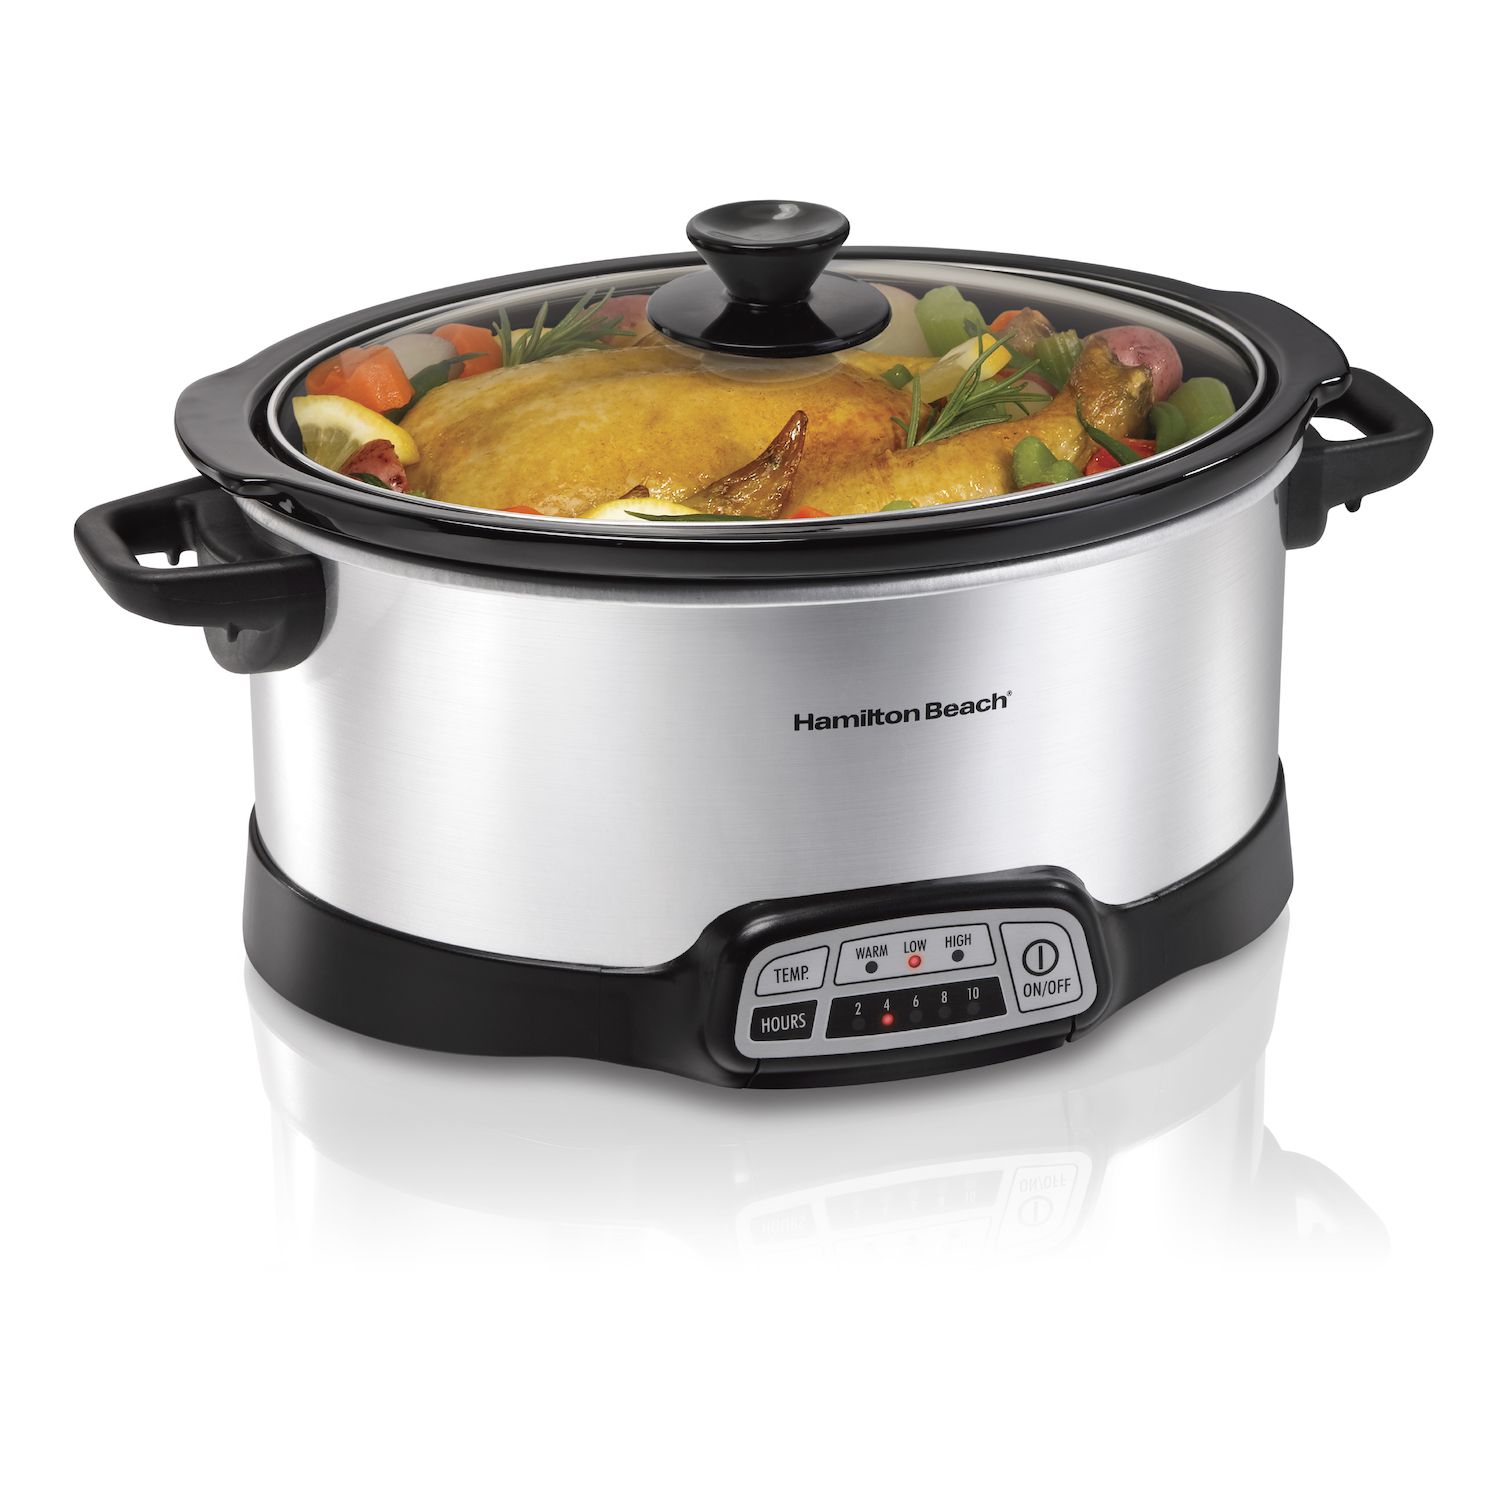  Crock-Pot 3.5 Quart Casserole Manual Slow Cooker, Charcoal &  Crockpot 8 Quart Slow Cooker with Auto Warm Setting and Cookbook, Black  Stainless Steel: Home & Kitchen